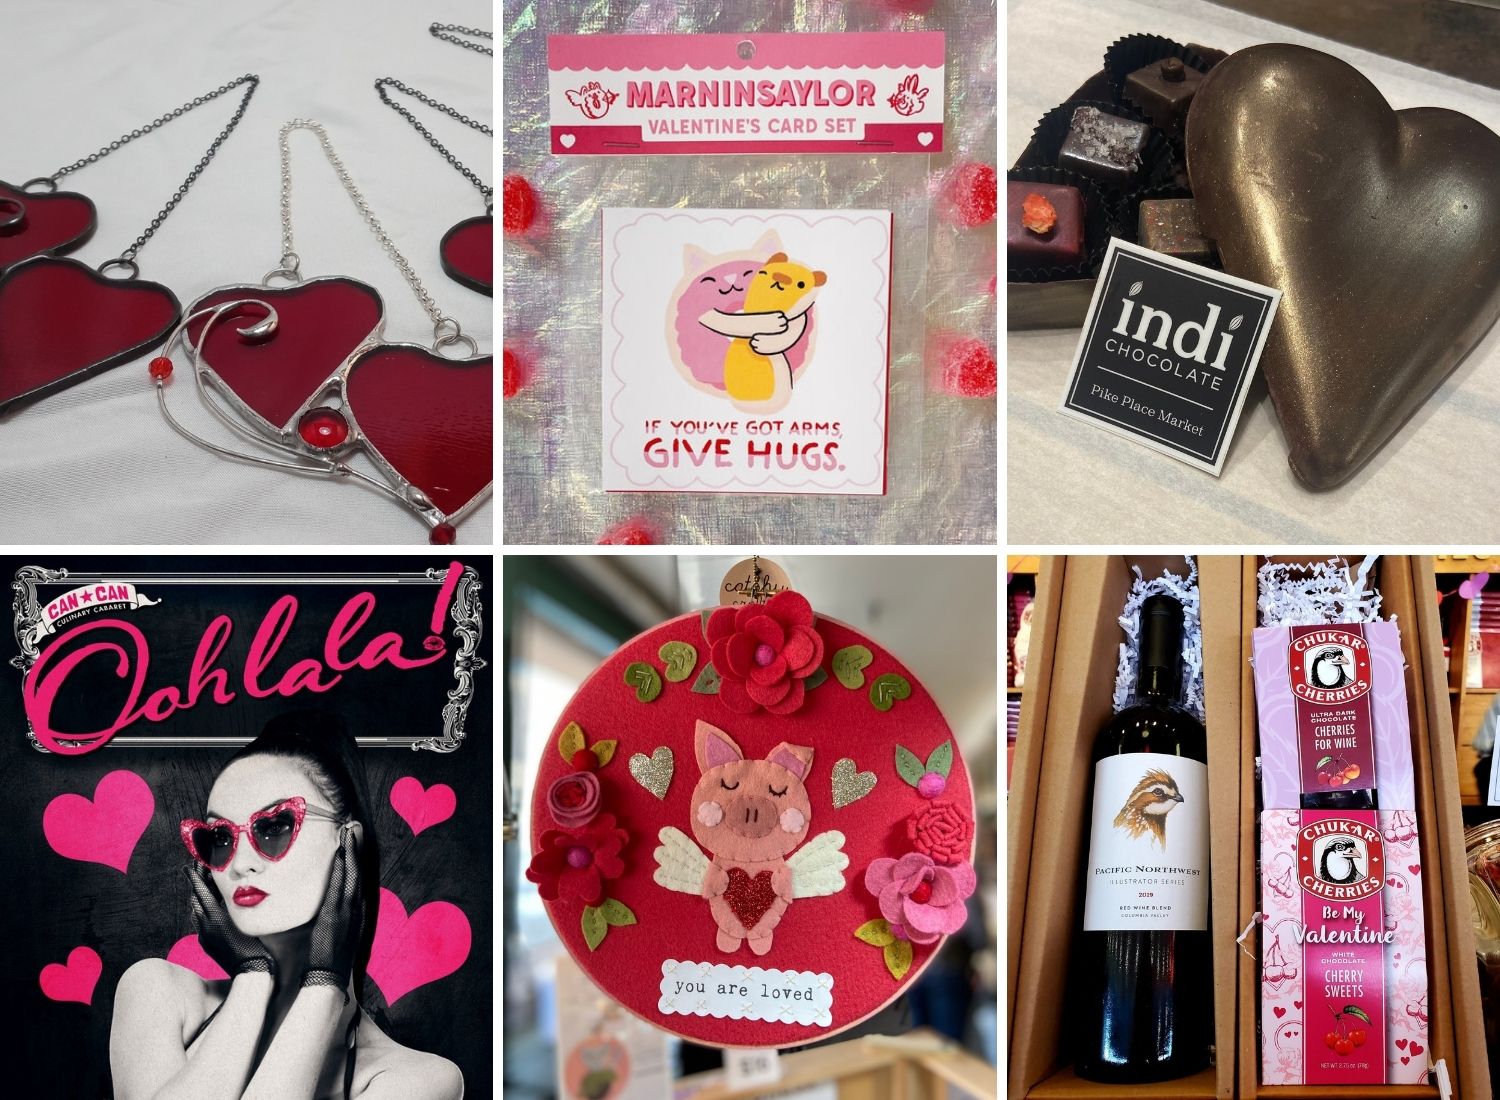 Celebrate!  Valentine's Day Gifts For Him : Gift Baskets Make Great  Valentine's Gifts for Men - All the Buzz